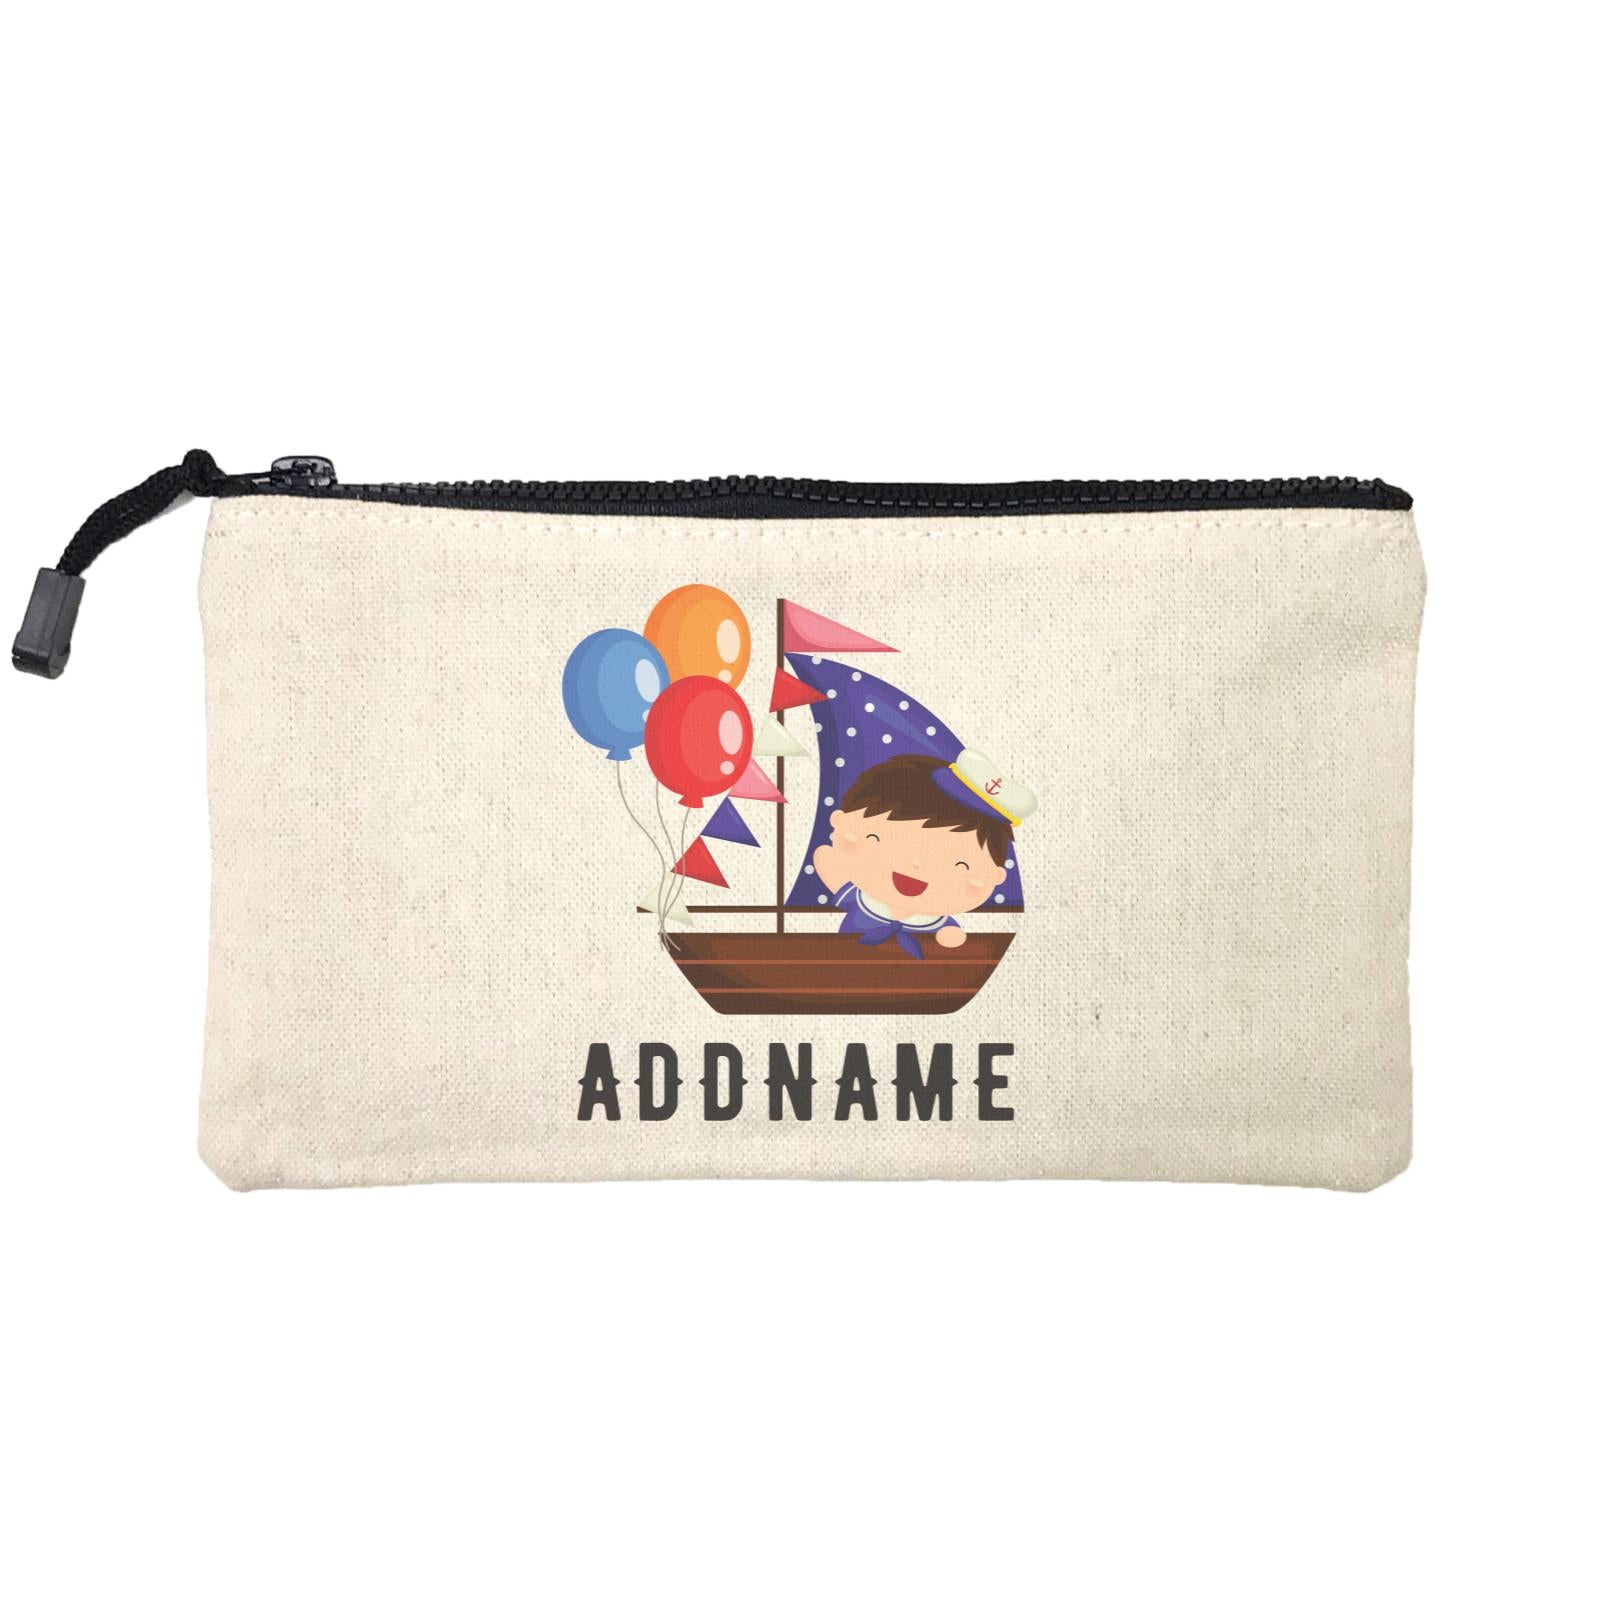 Birthday Sailor Baby Boy In Ship With Balloon Addname Mini Accessories Stationery Pouch